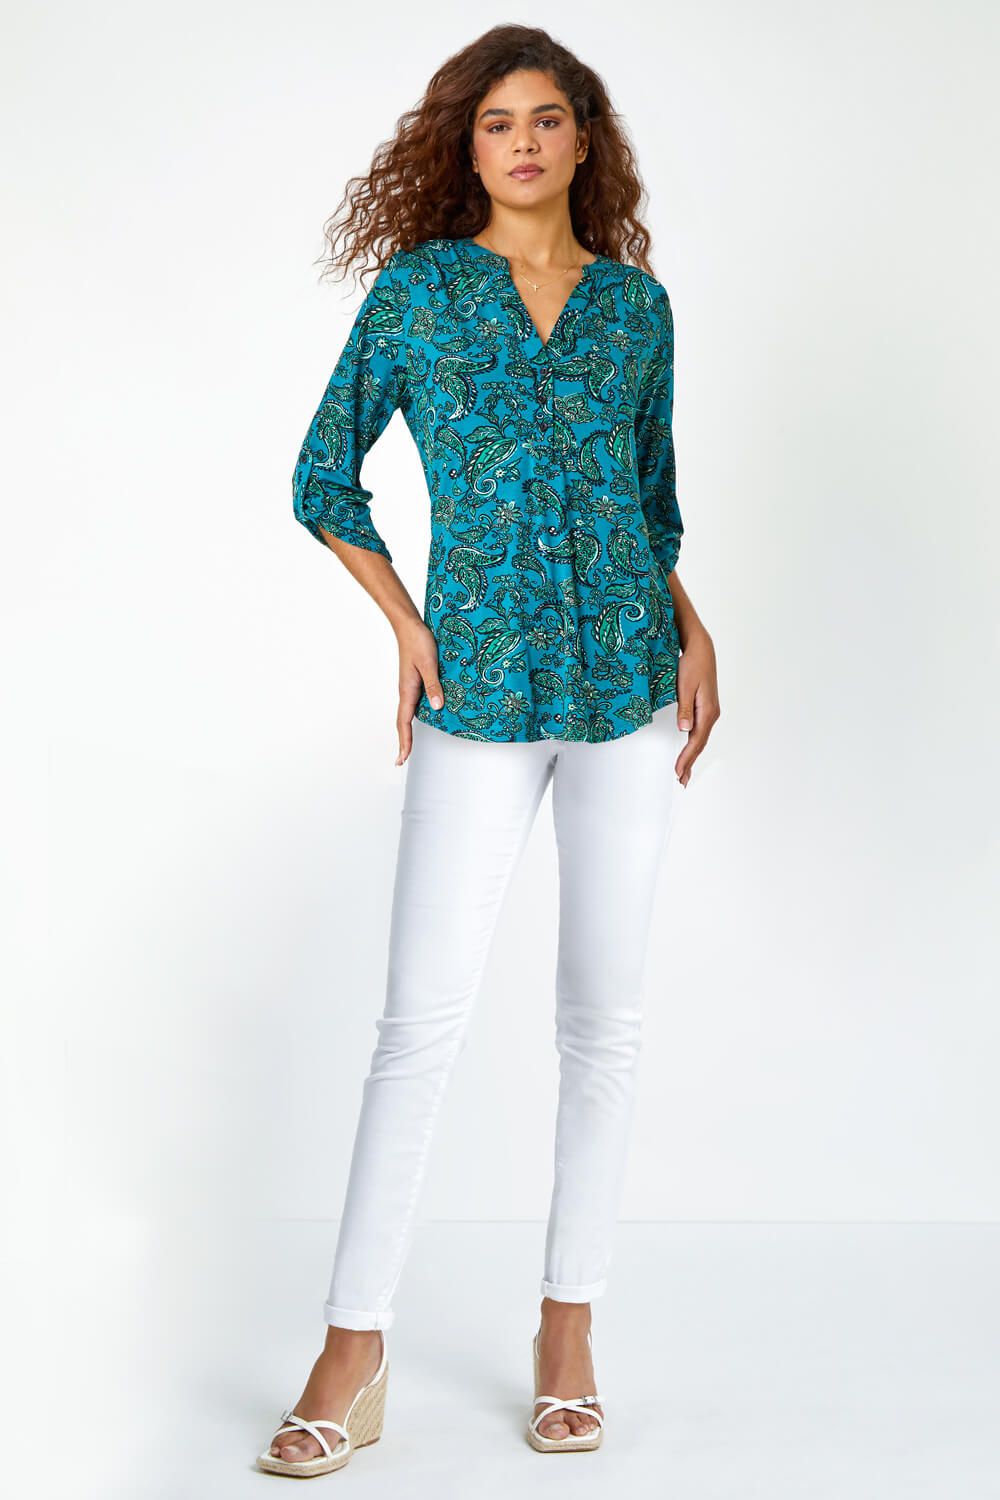 Teal Paisley Jersey Stretch Shirt, Image 2 of 5